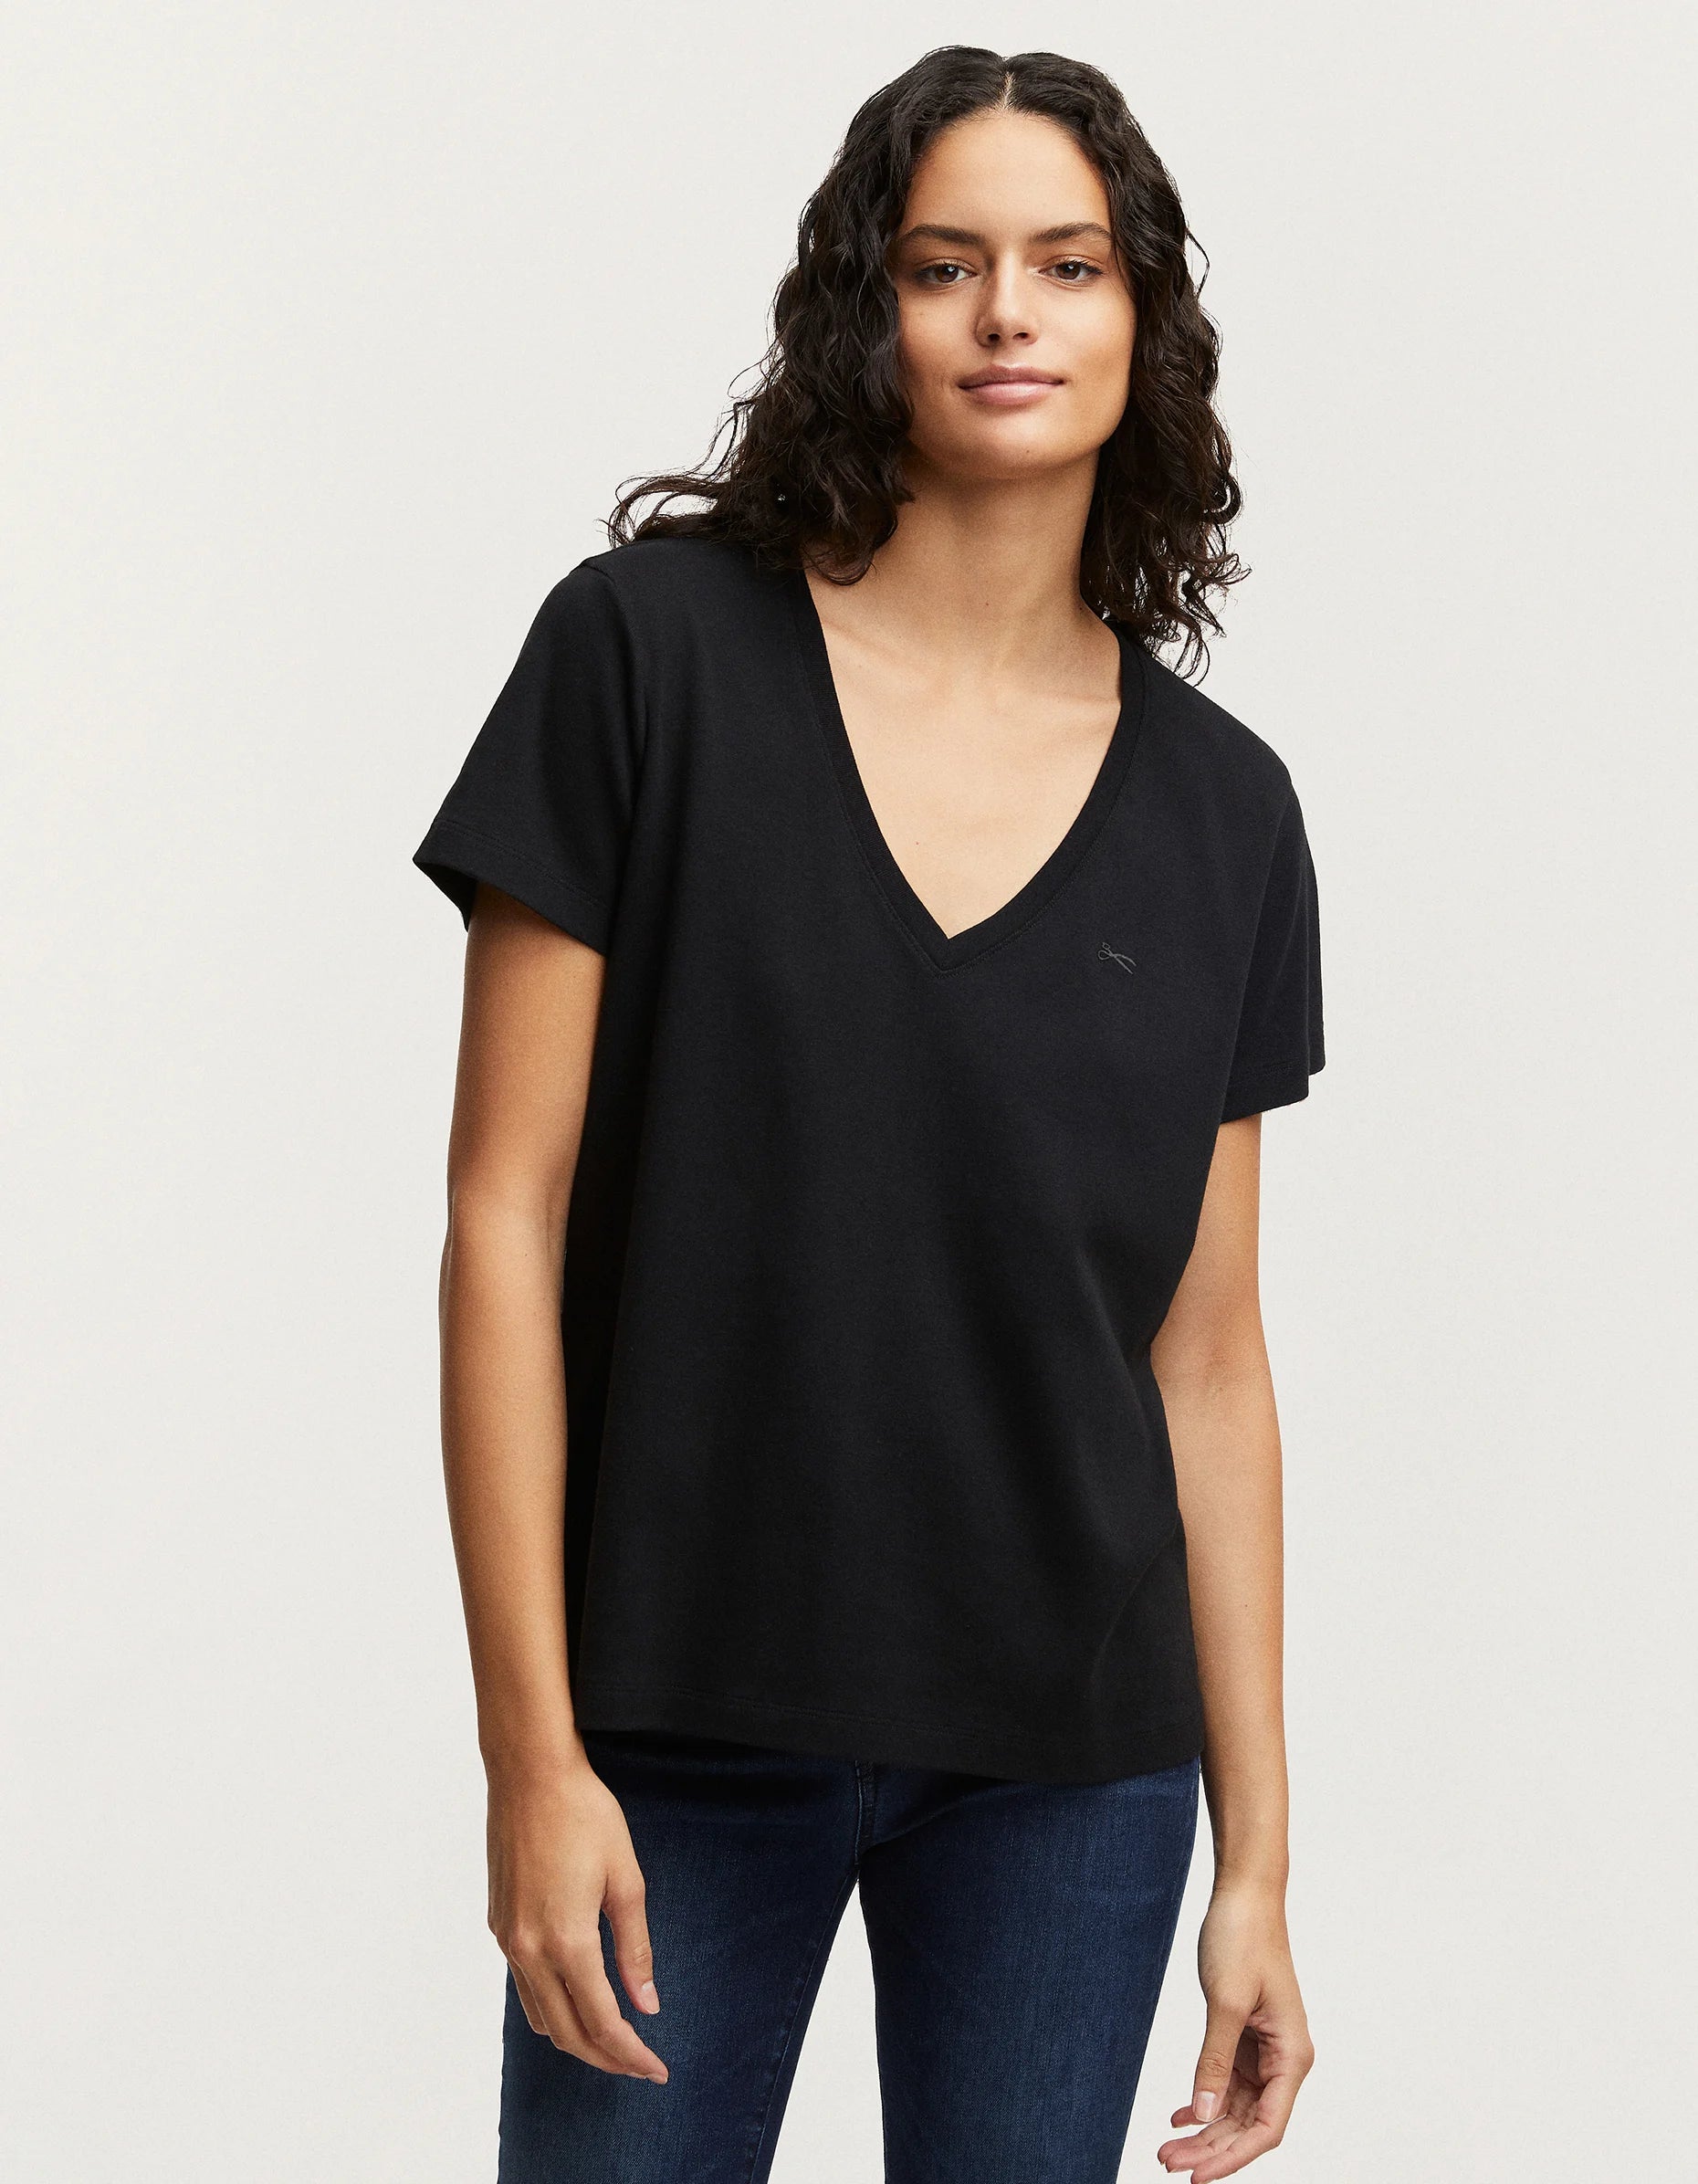 A woman wearing black jeans and a black v-neck t-shirt made of RAMONA Tee Rib Cotton Jersey by Denham.